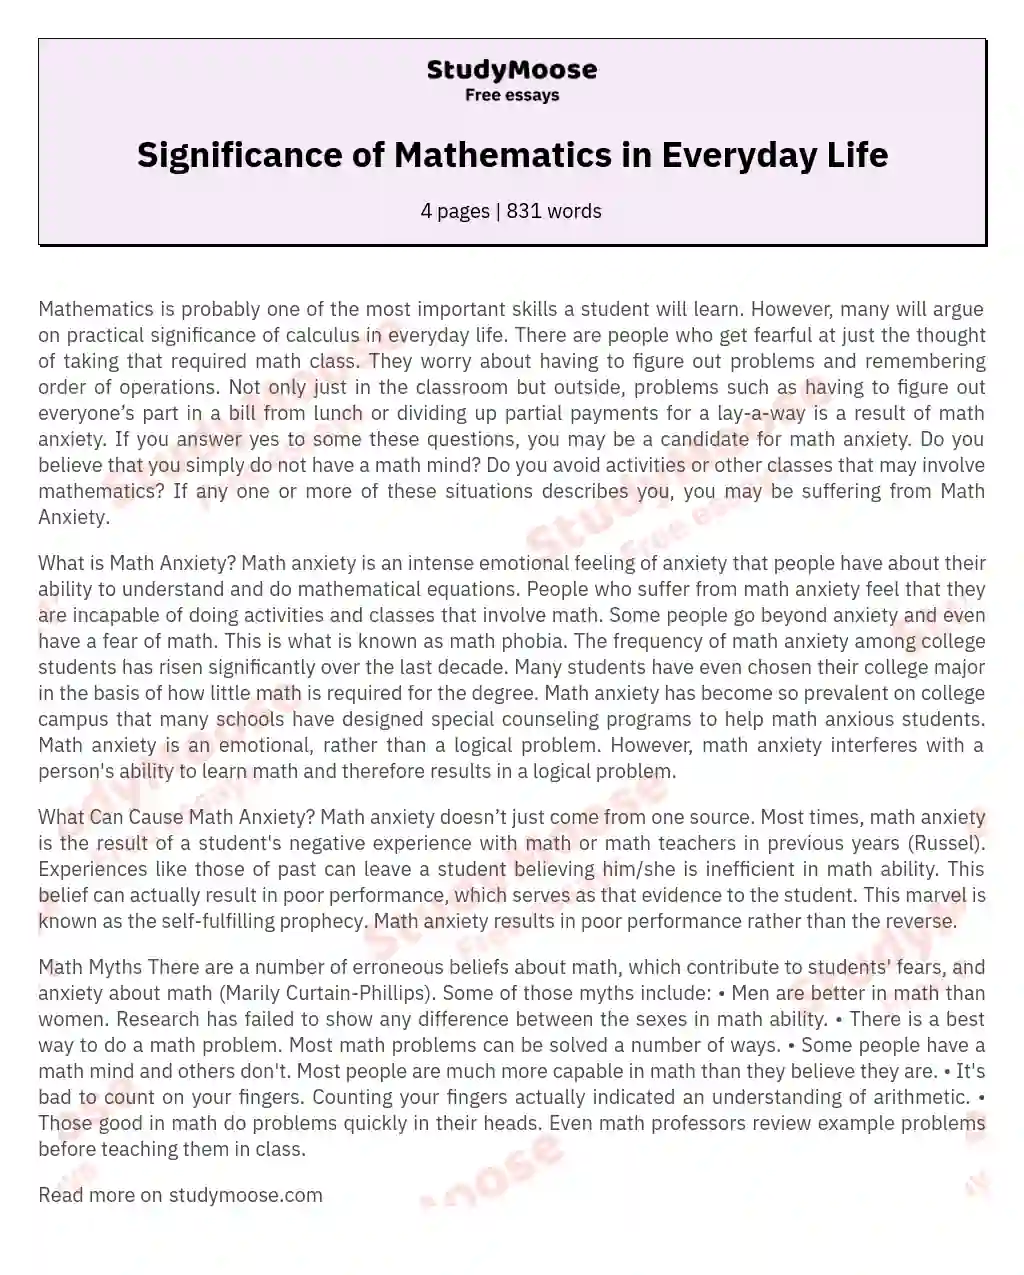 Significance of Mathematics in Everyday Life